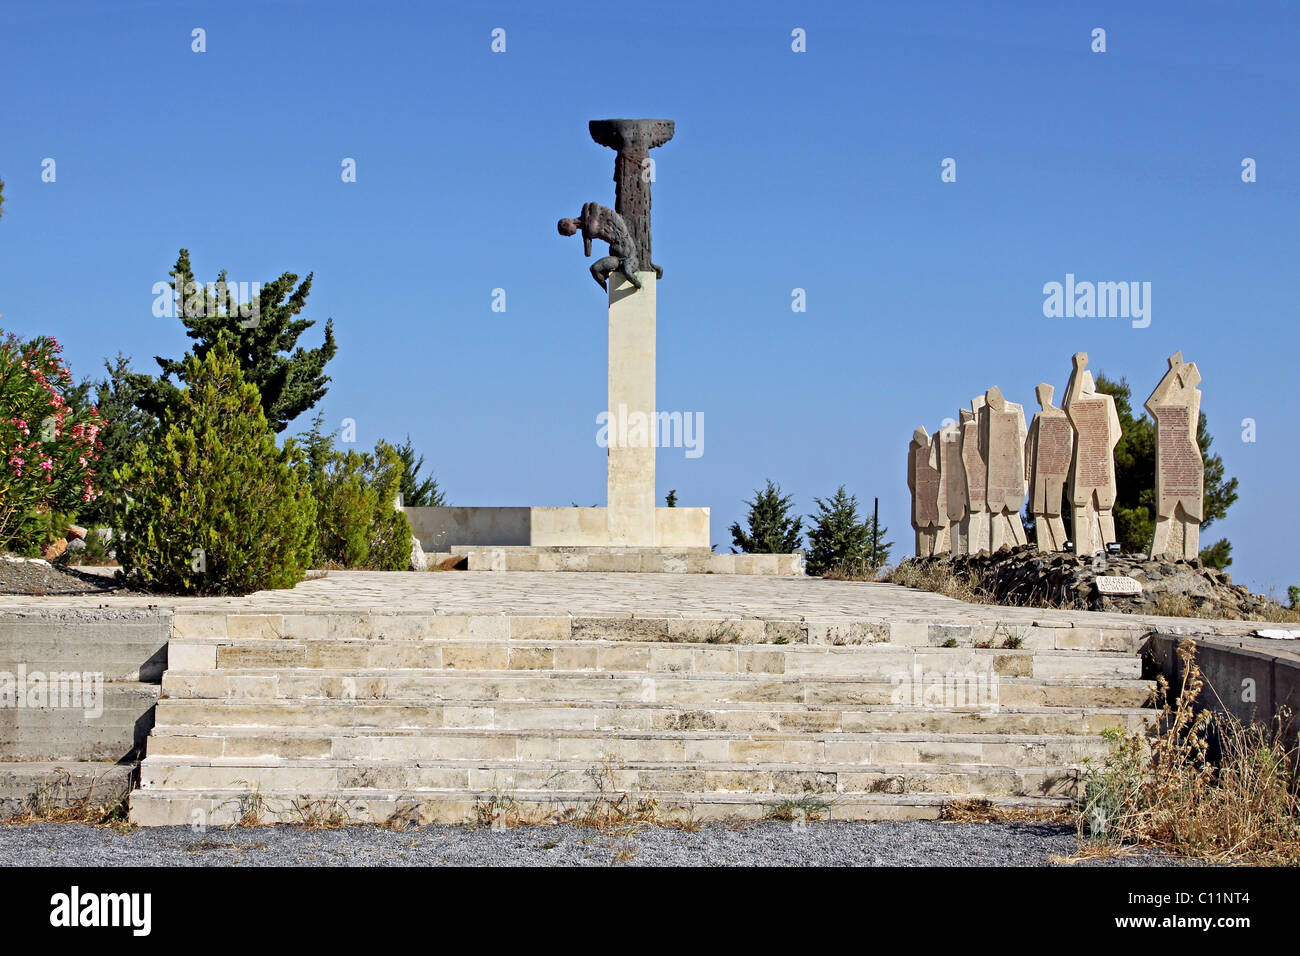 Memorial to the 440 people that executed here during the Second World War, Amiras, Viannos, Crete, Greece, Europe Stock Photo